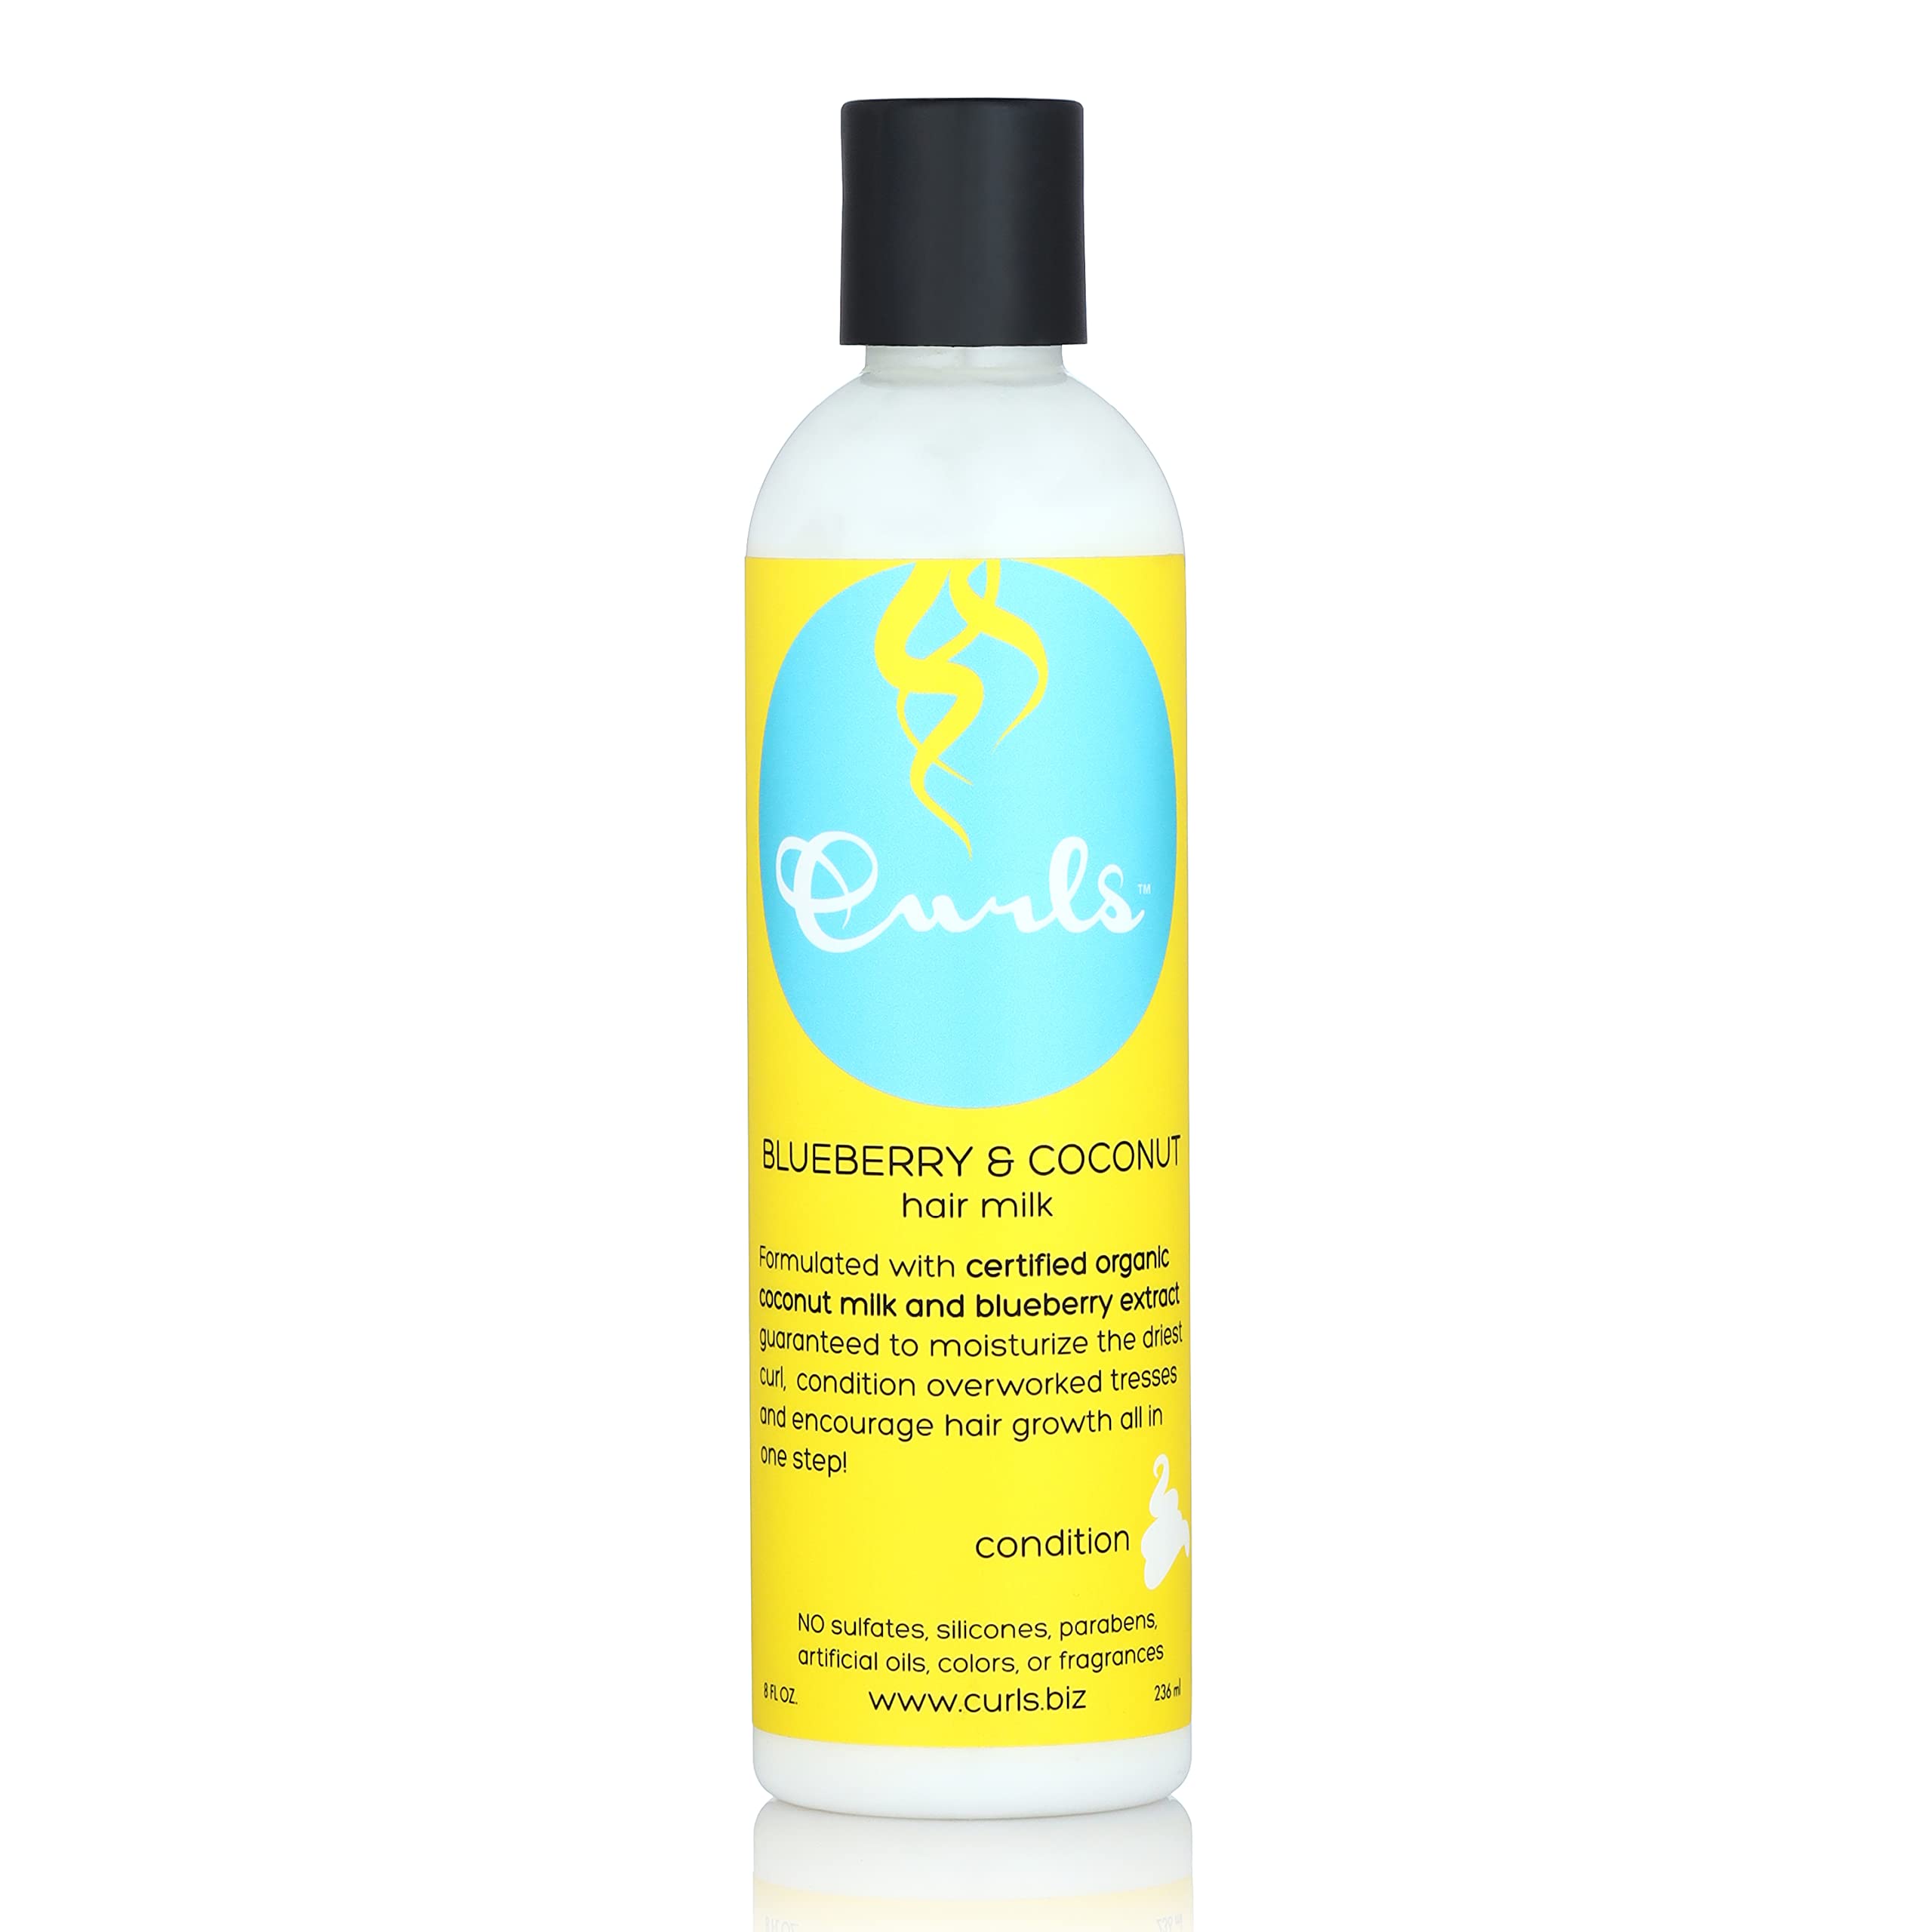 Curls Blueberry Bliss Blueberry & Coconut Hair Milk - Leave In Conditioner and Styler - Moisturizes Curly and Coily Hair - 8 Fl Oz